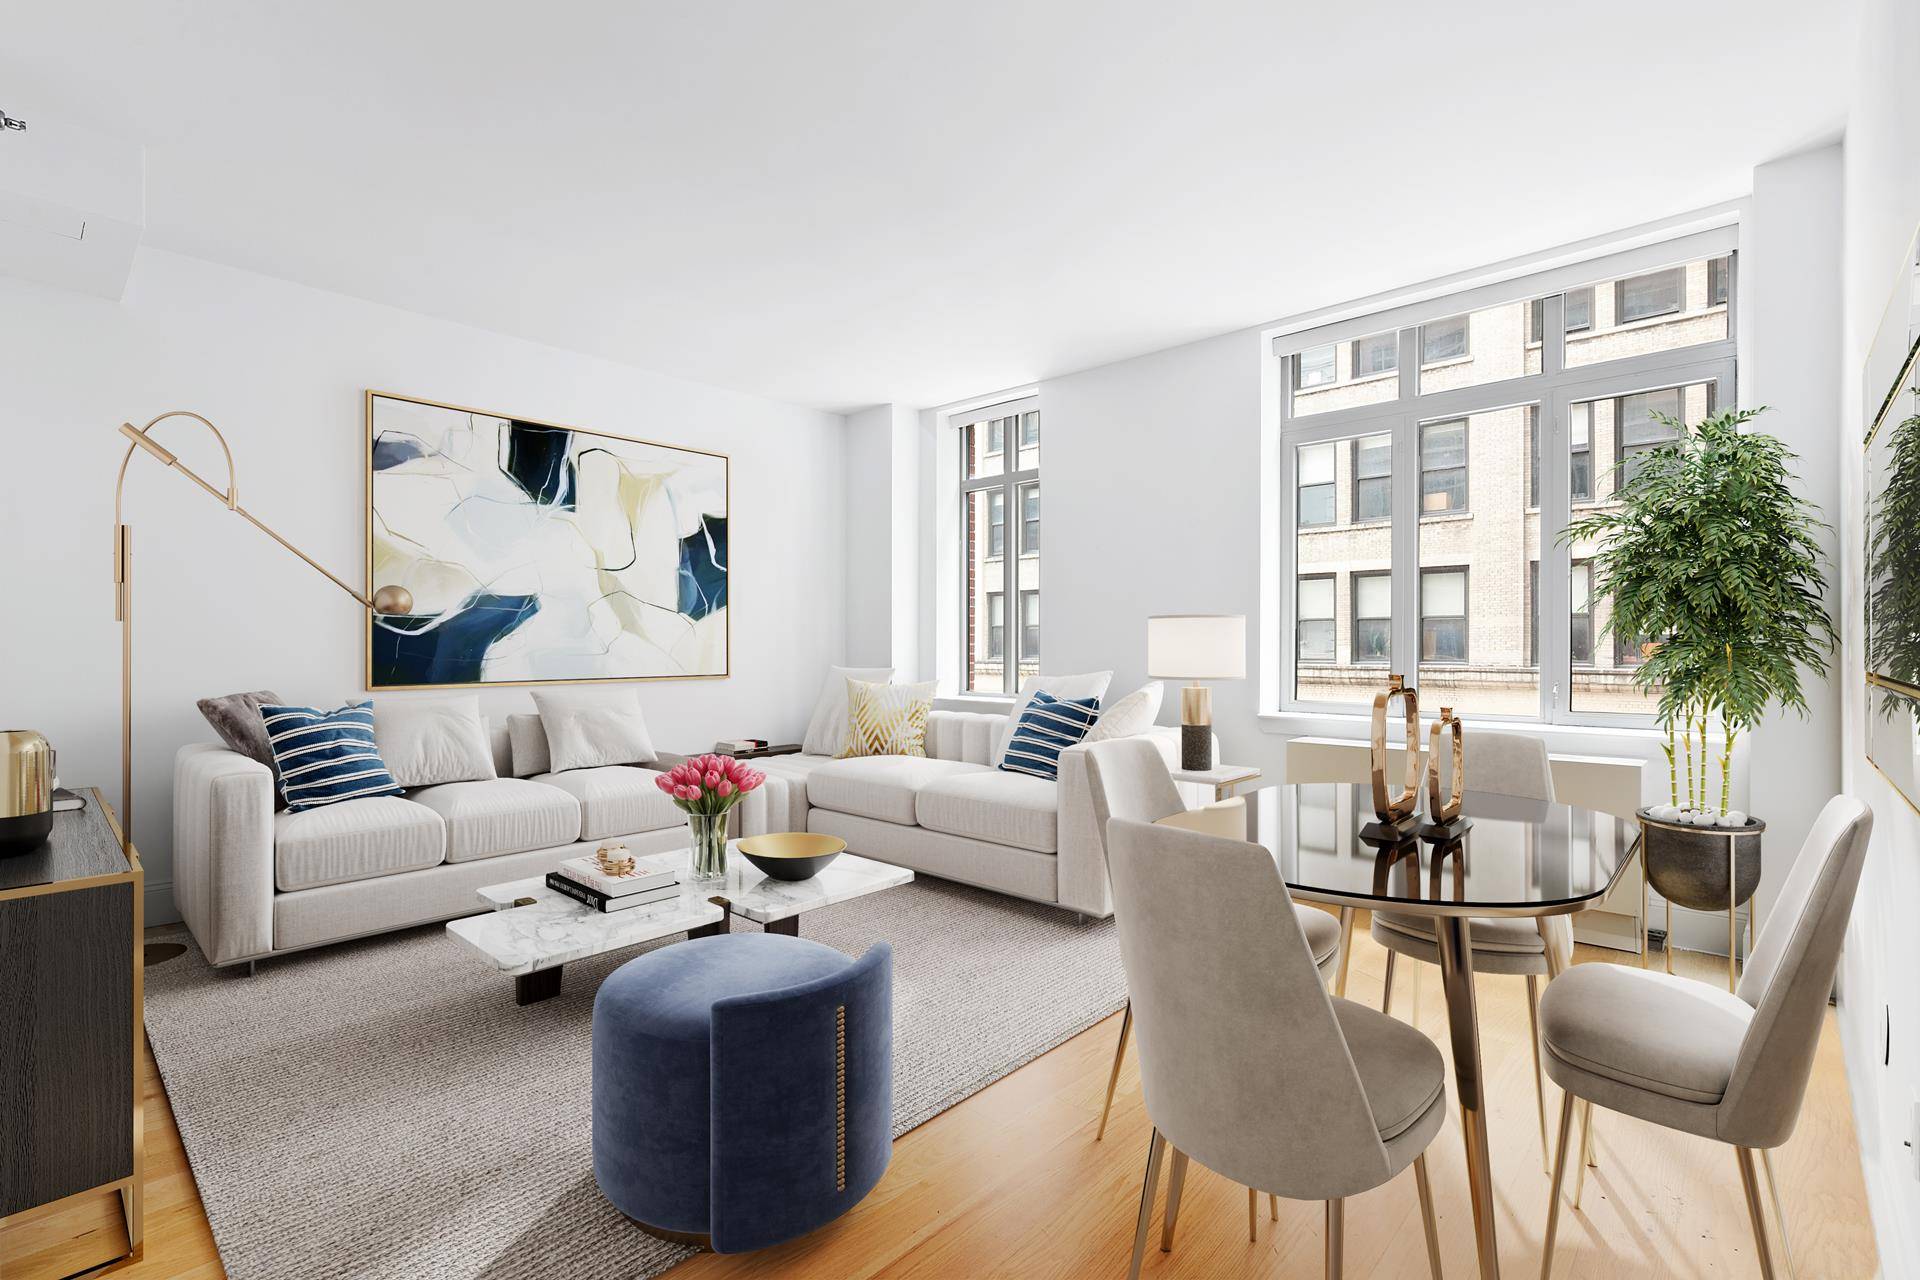 Just listed ! A prime location and incredible value await you at 125 West 22nd Street, between Sixth and Seventh Avenues in the heart of Chelsea.